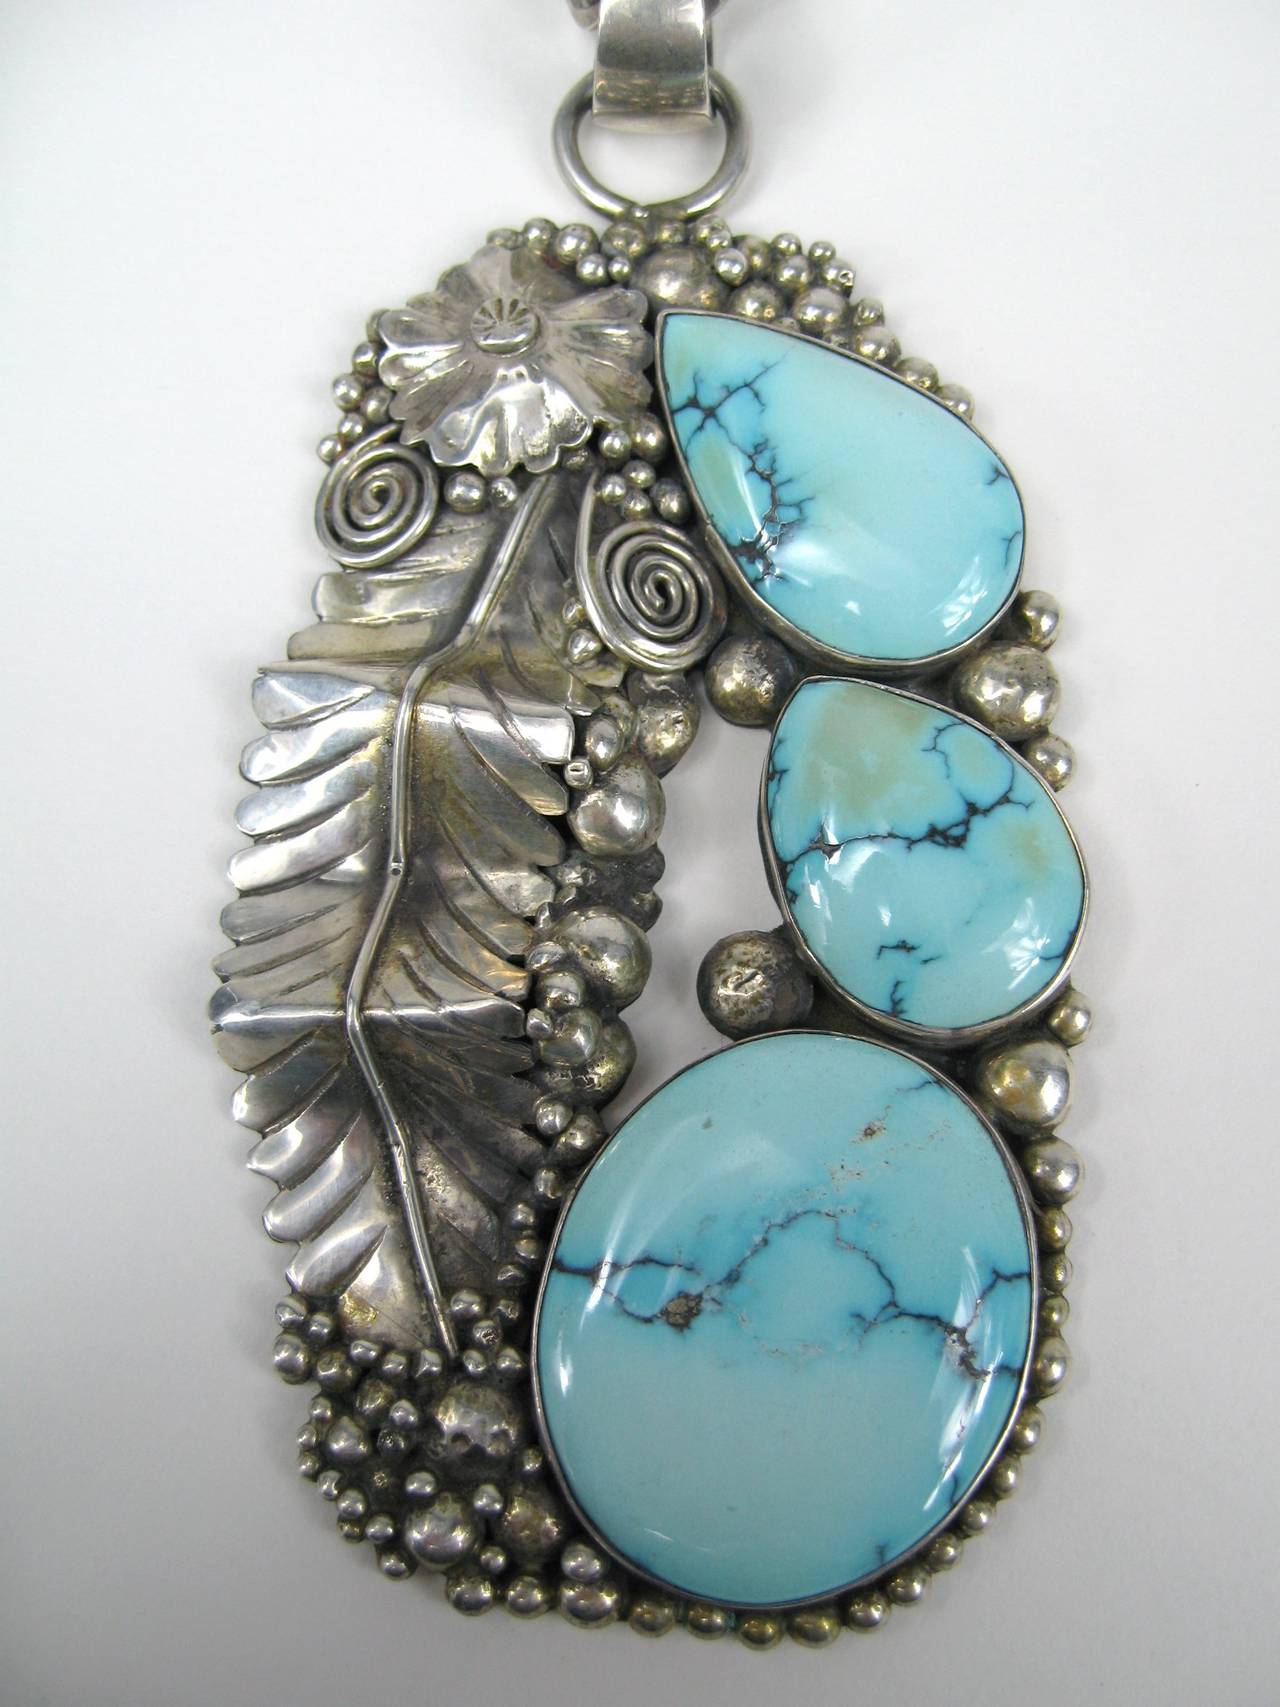 Stunning Turquoise on this handmade piece of Native American Jewelry.  Large in scale. 3 pieces of Turquoise set in an elaborate leaf pendant
Measuring 4.28 inches long x 2.21 inches width. Hanging from a link chain that measures 23 inches long.